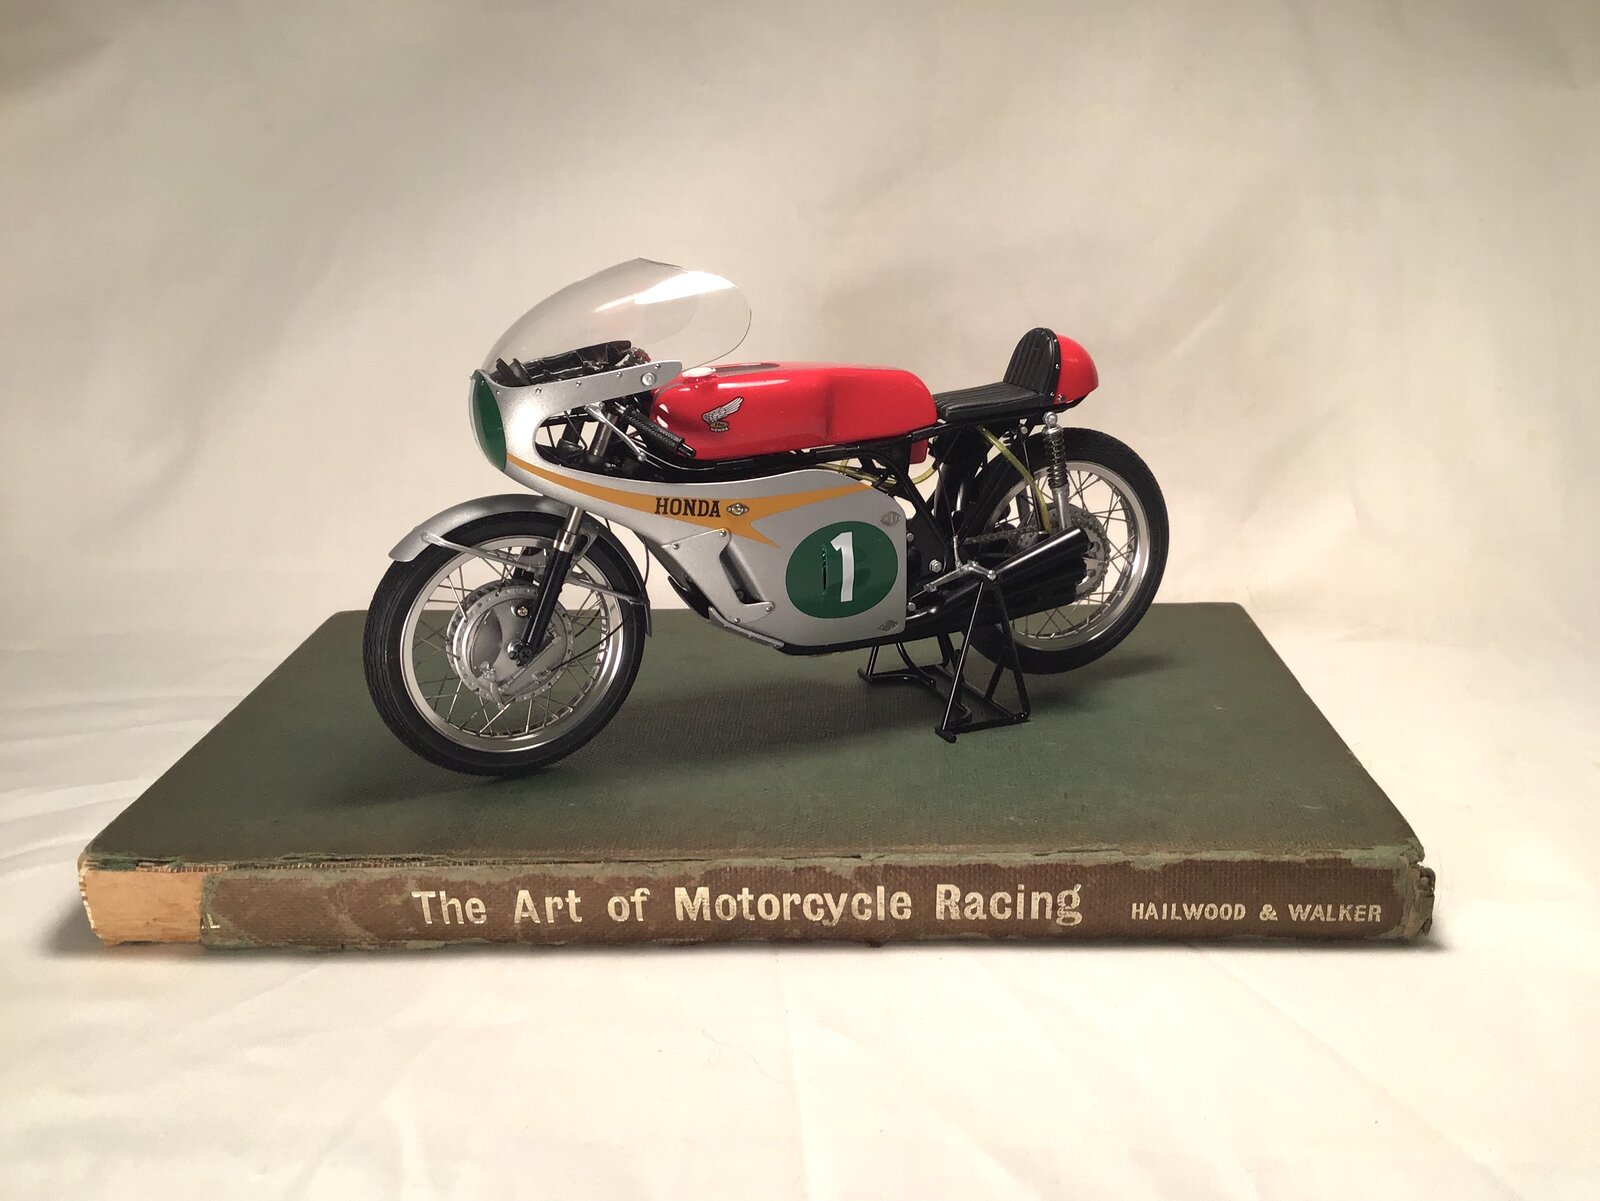 Scale model motorcycle